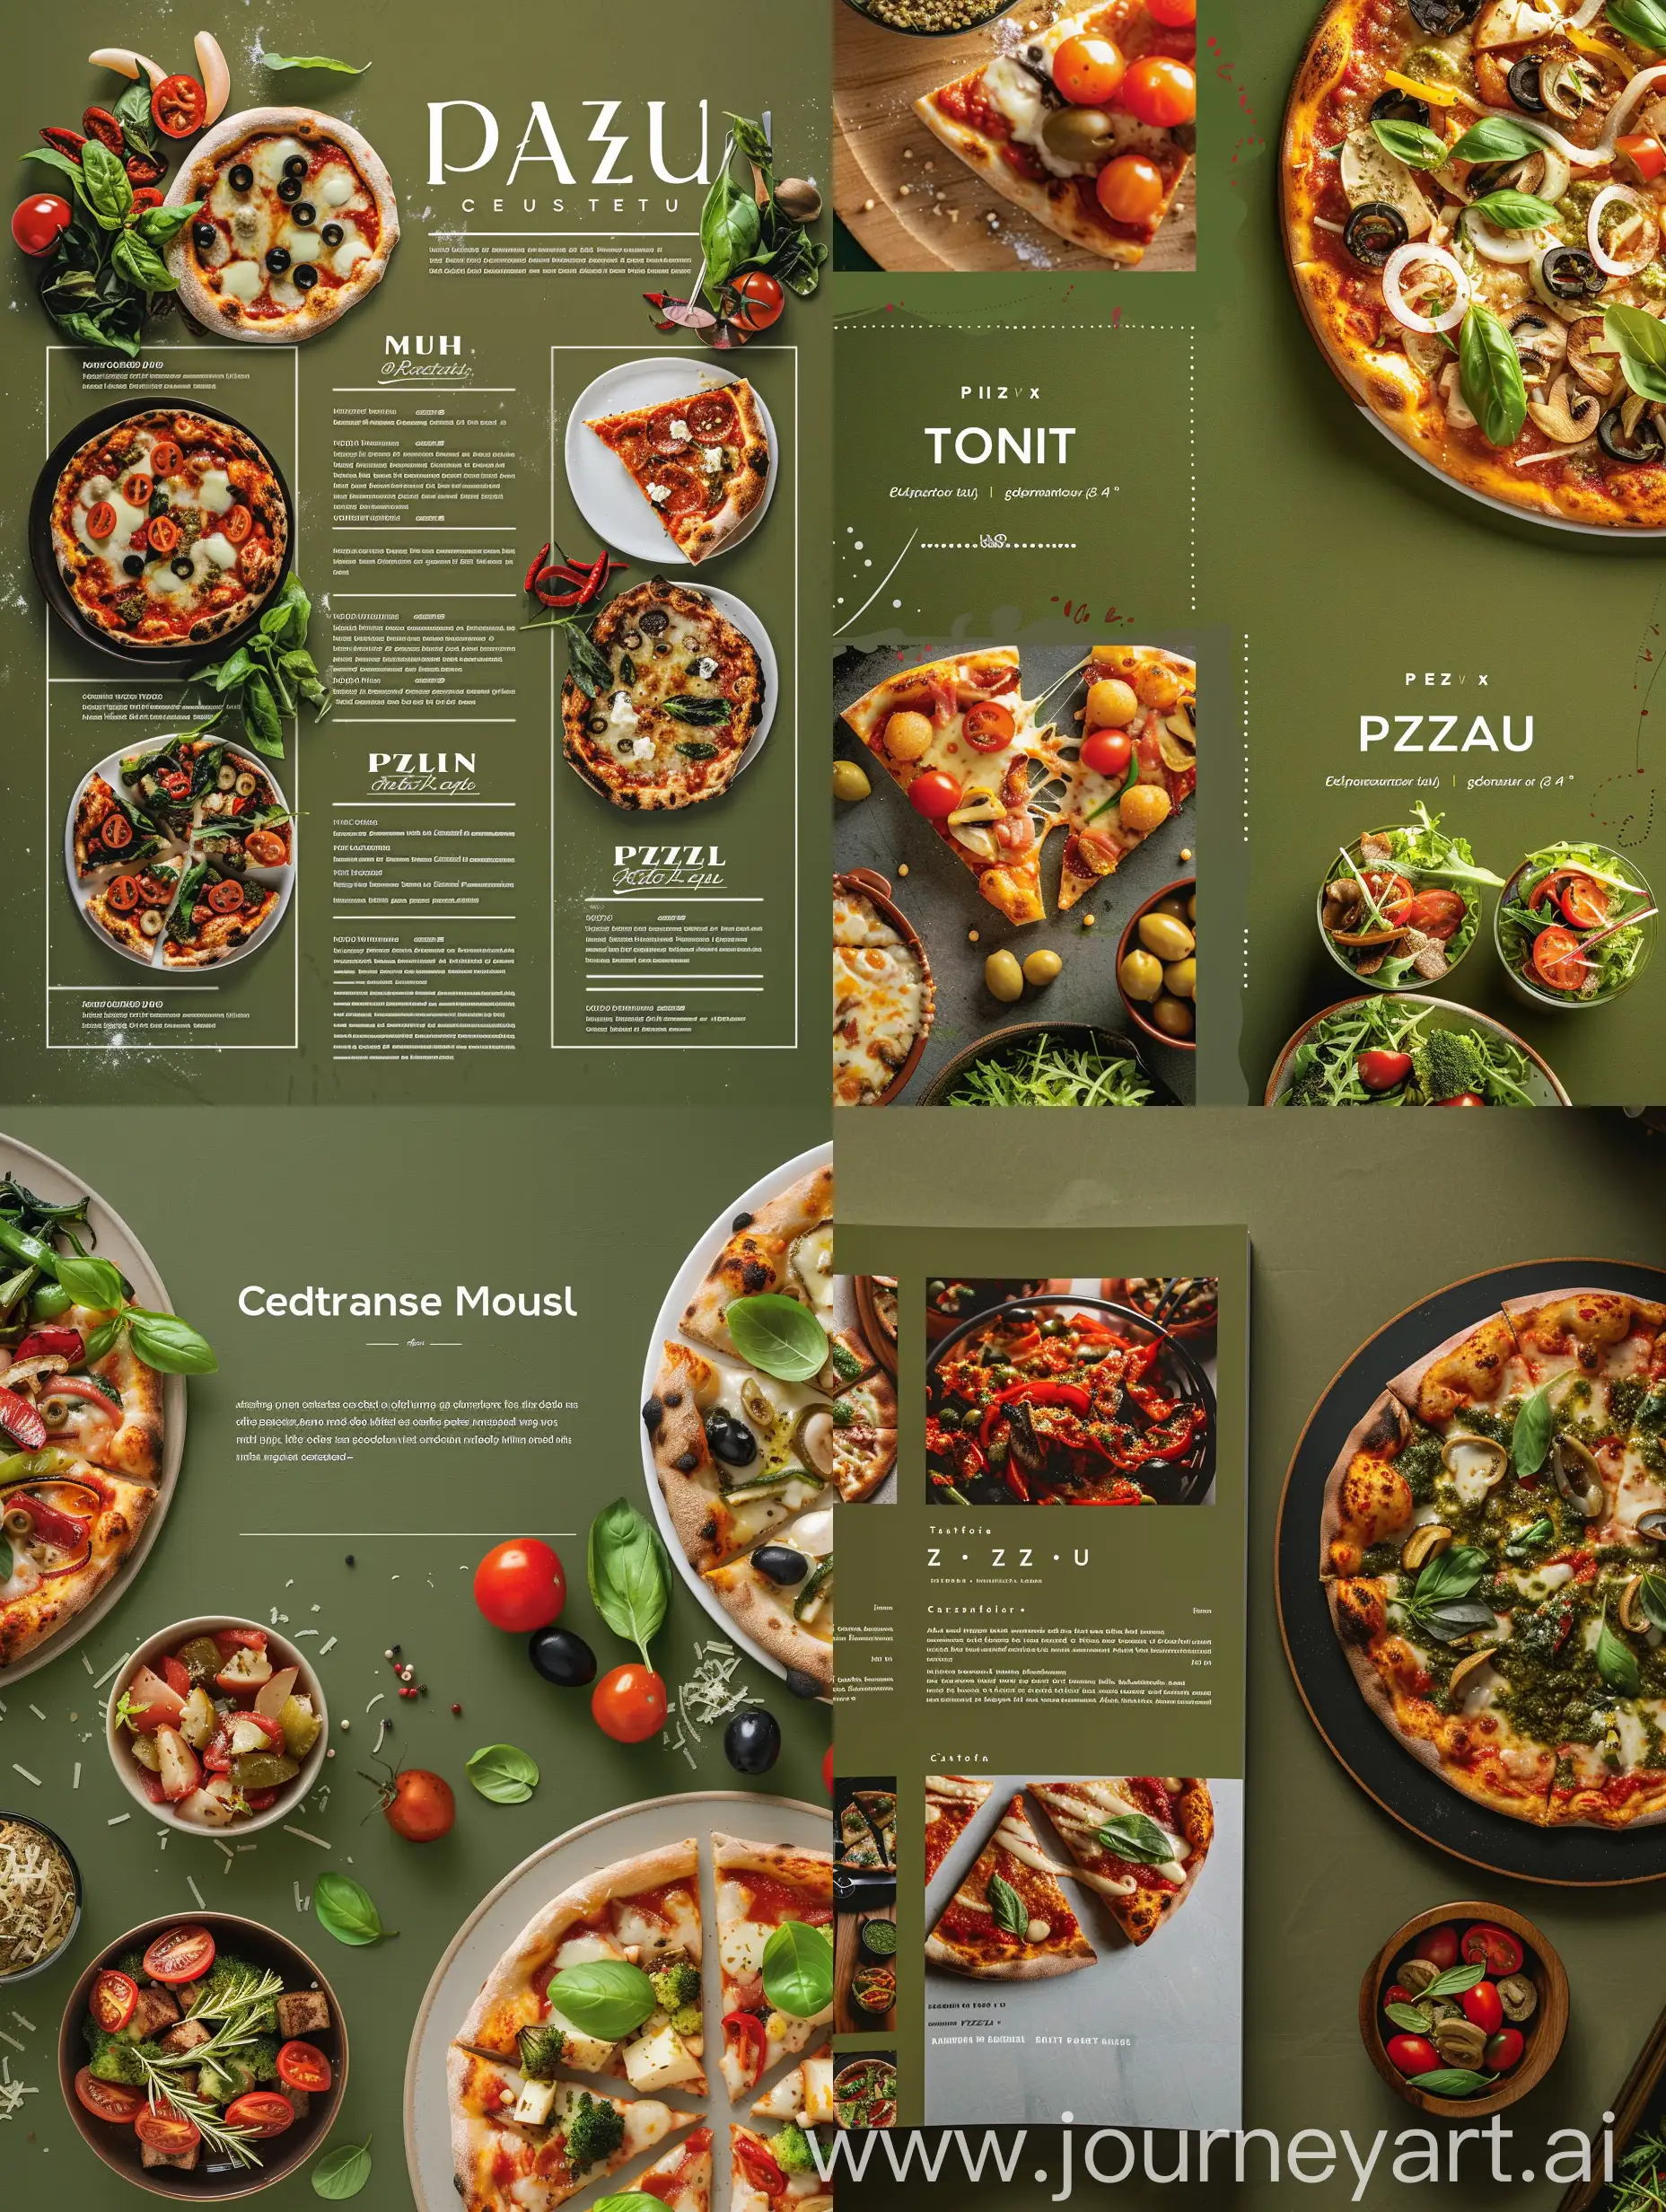 pizza resturant menu one page with photos of starters and text, olive green background